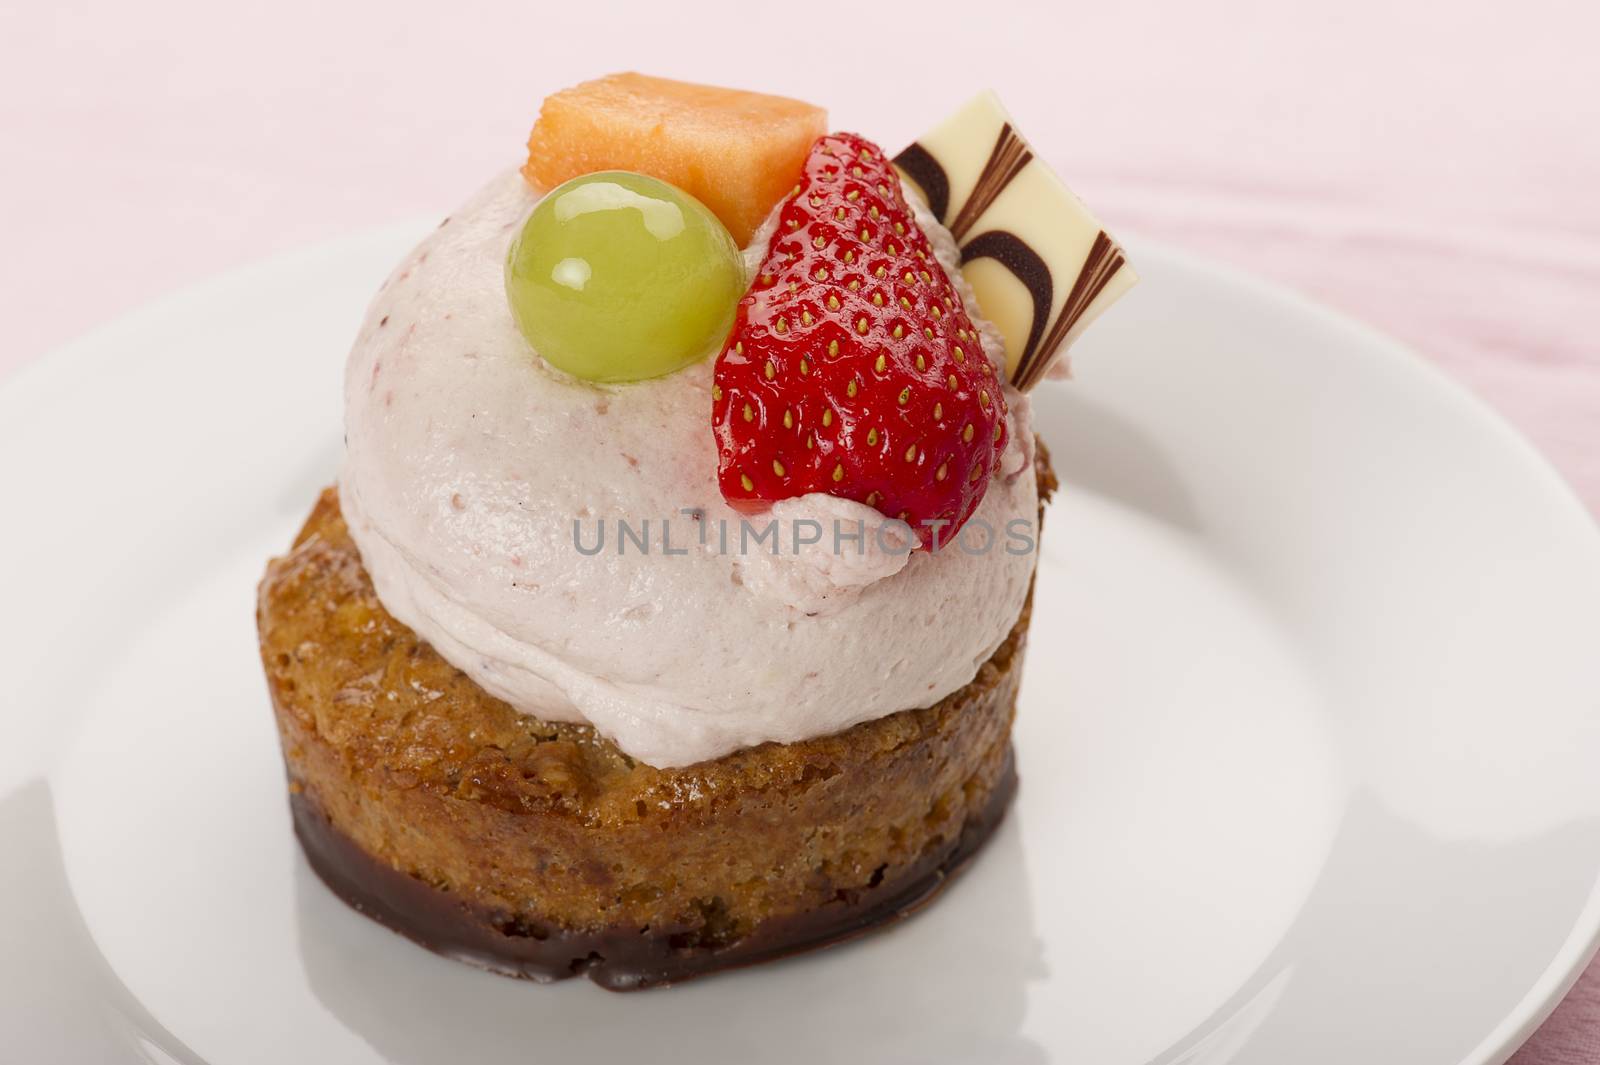 Freshly baked mini cake topped with creamy mousse and fresh tropical fruit with a chocolate wafer served on a plate for dessert or teatime refreshment, with copyspace